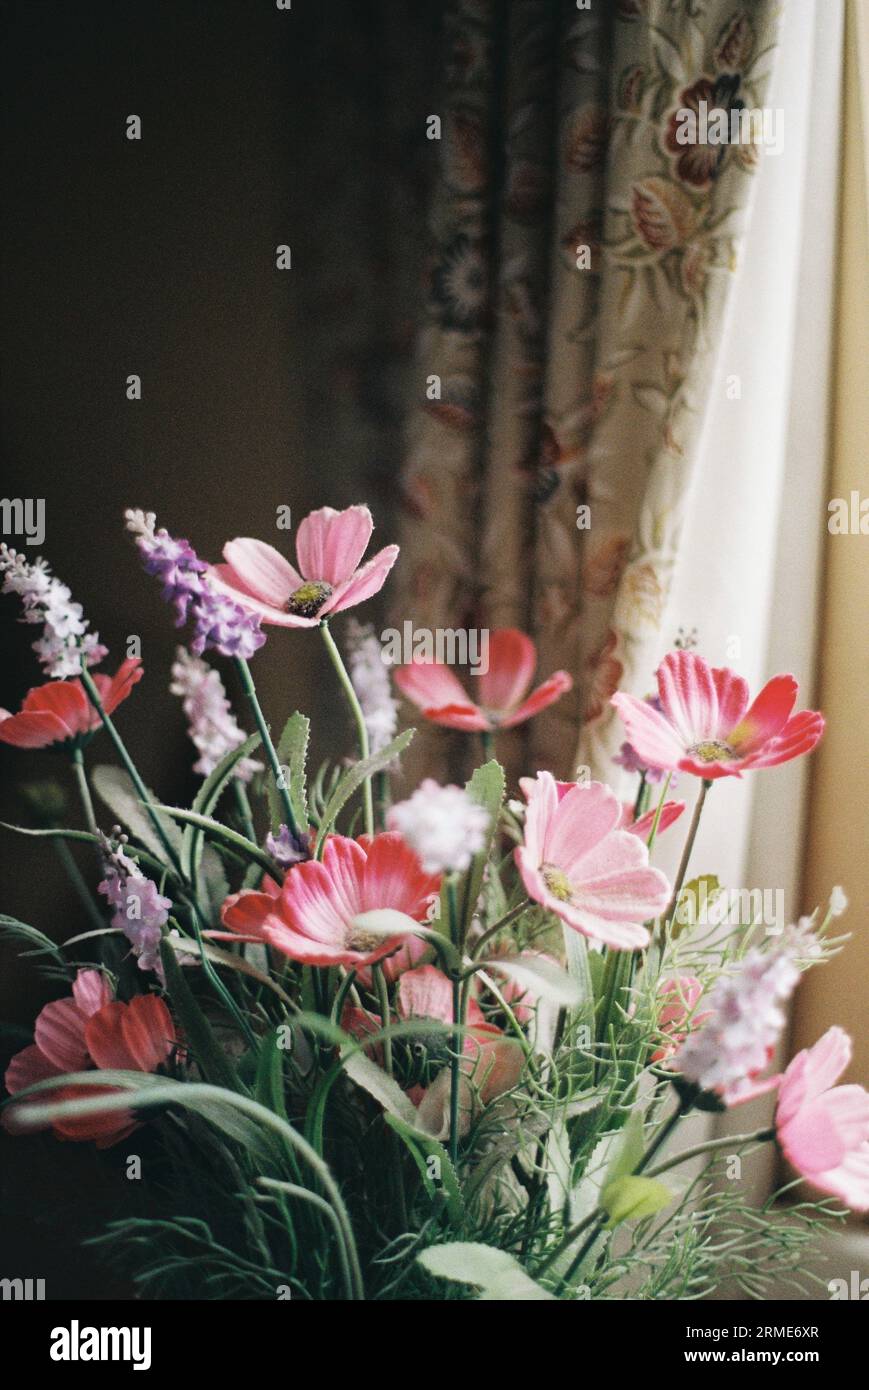 Artificial flowers in a vase by a window, home decor Stock Photo